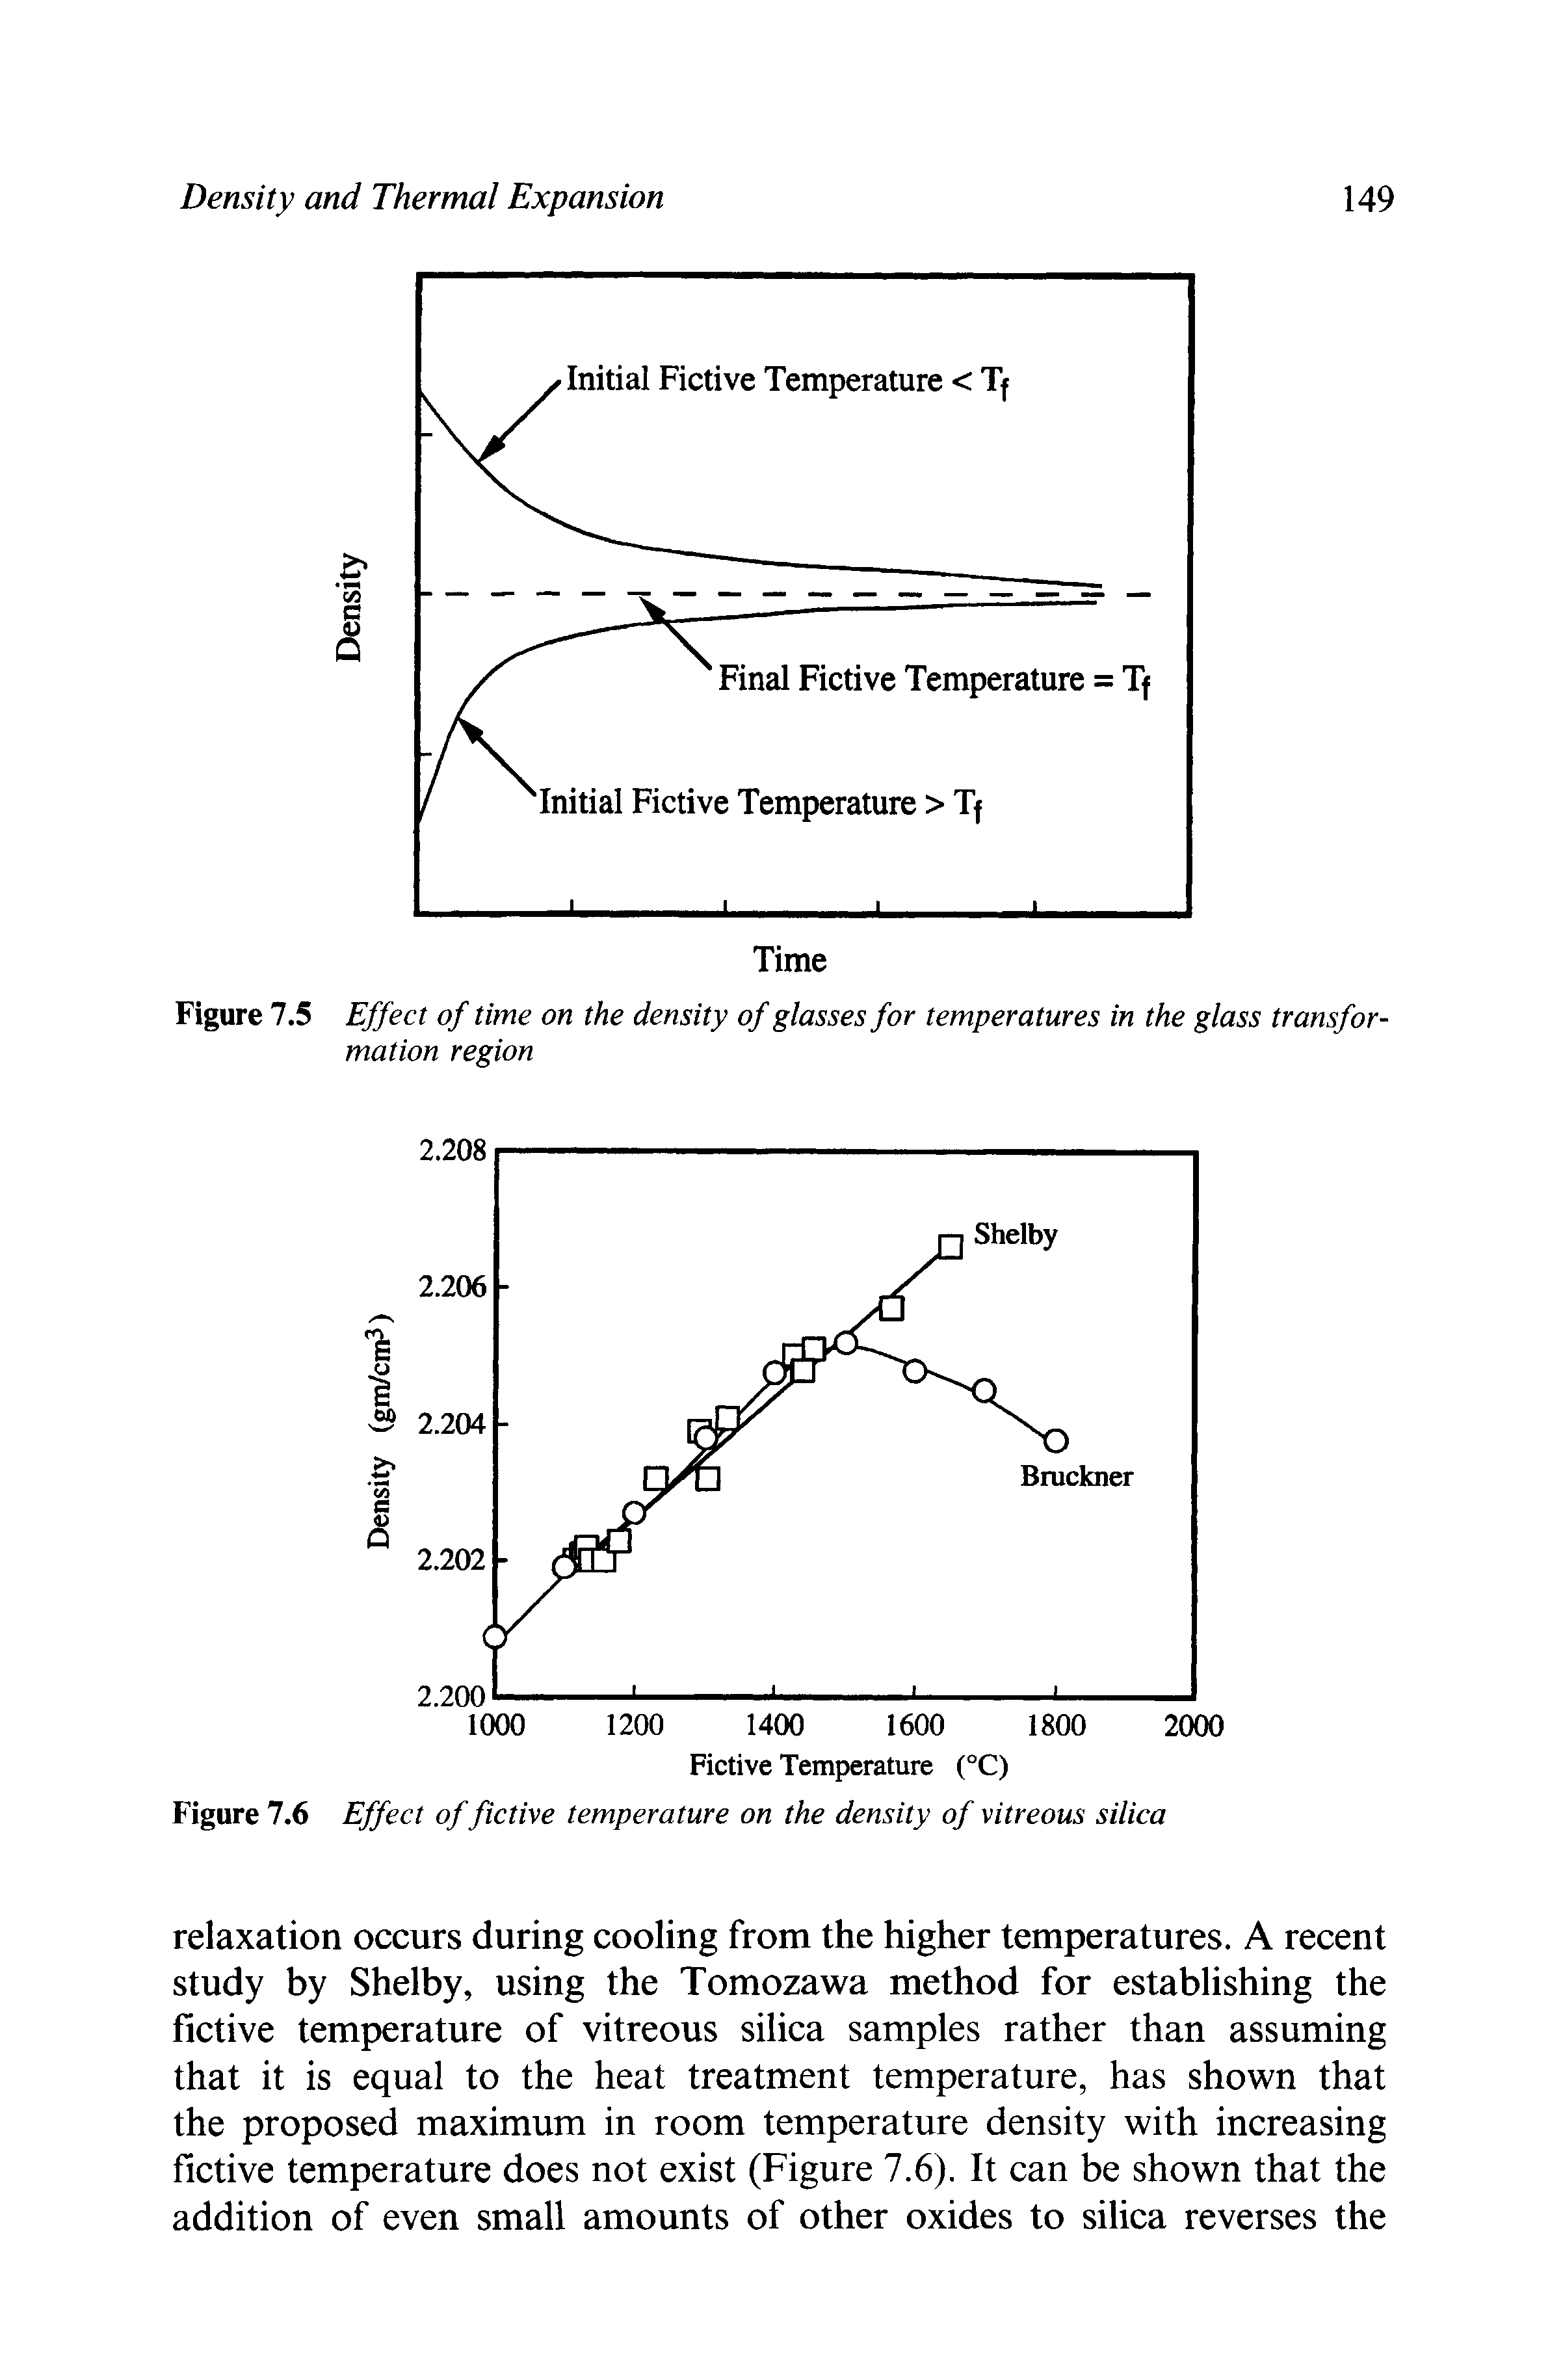 Figure 7.5 Effect of time on the density of glasses for temperatures in the glass transformation region...